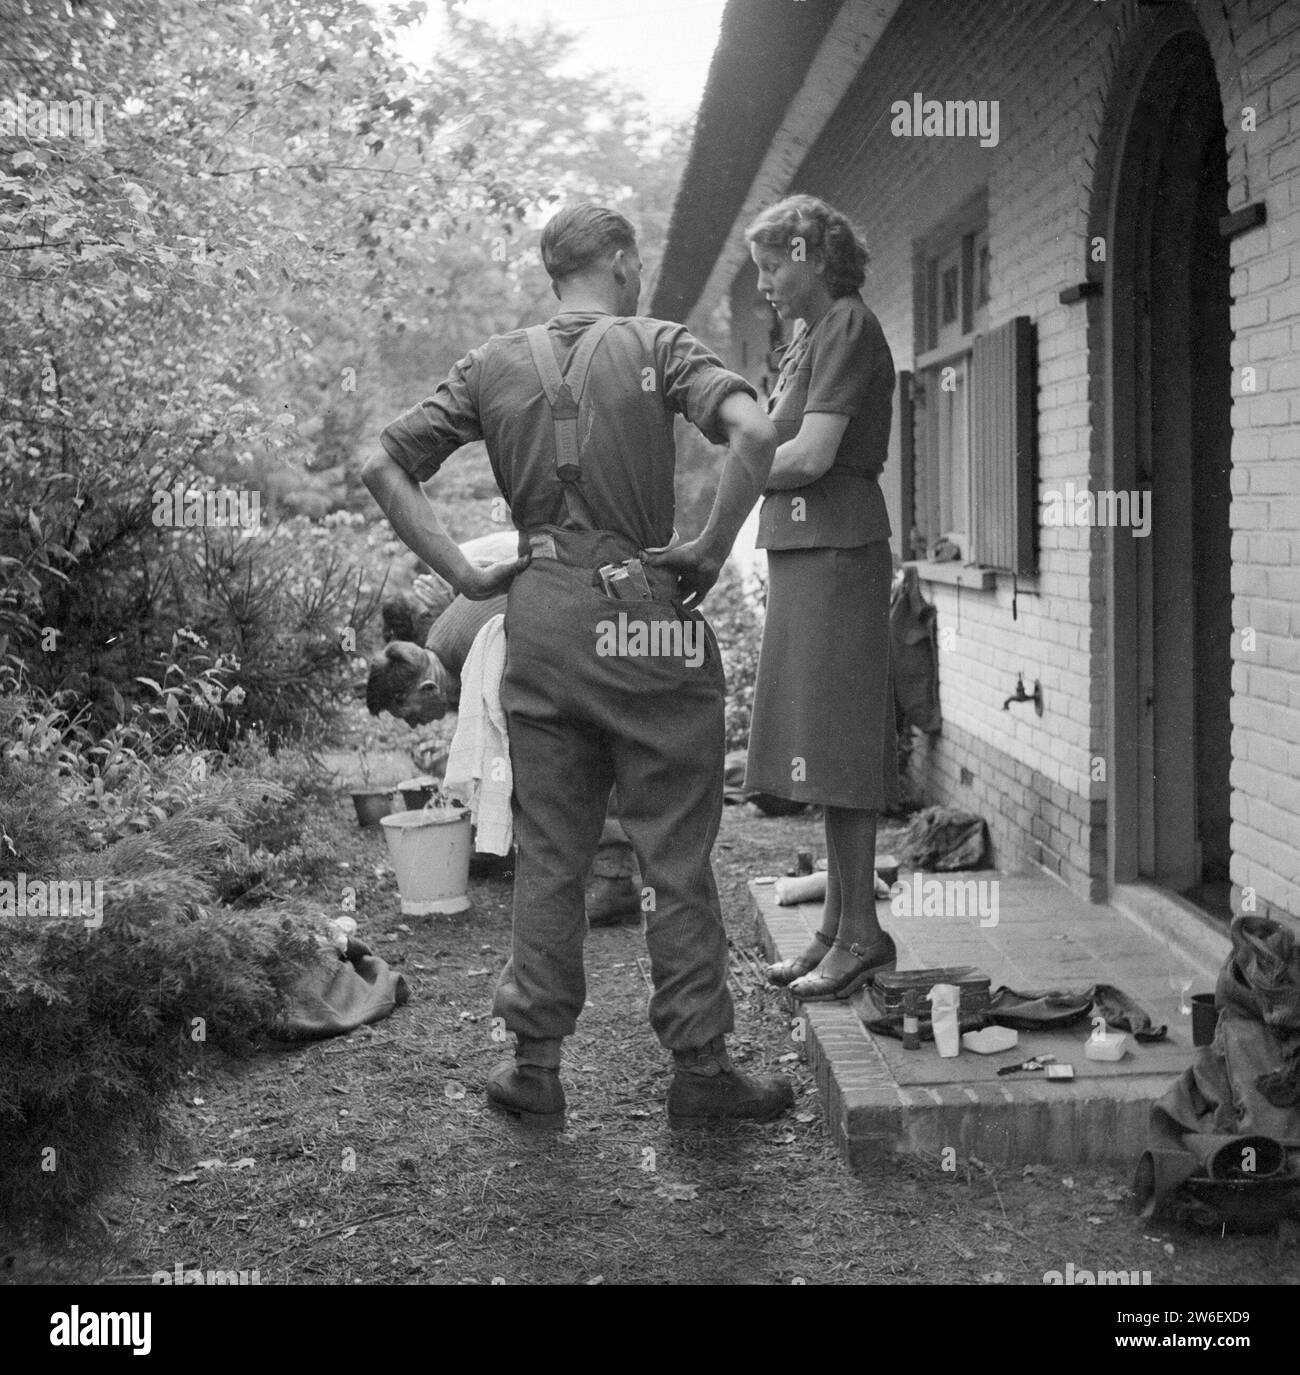 Soldier of the Irish Guards in conversation with a resident of Aalst, with soldiers washing themselves in the background ca. September 18, 1944 Stock Photo